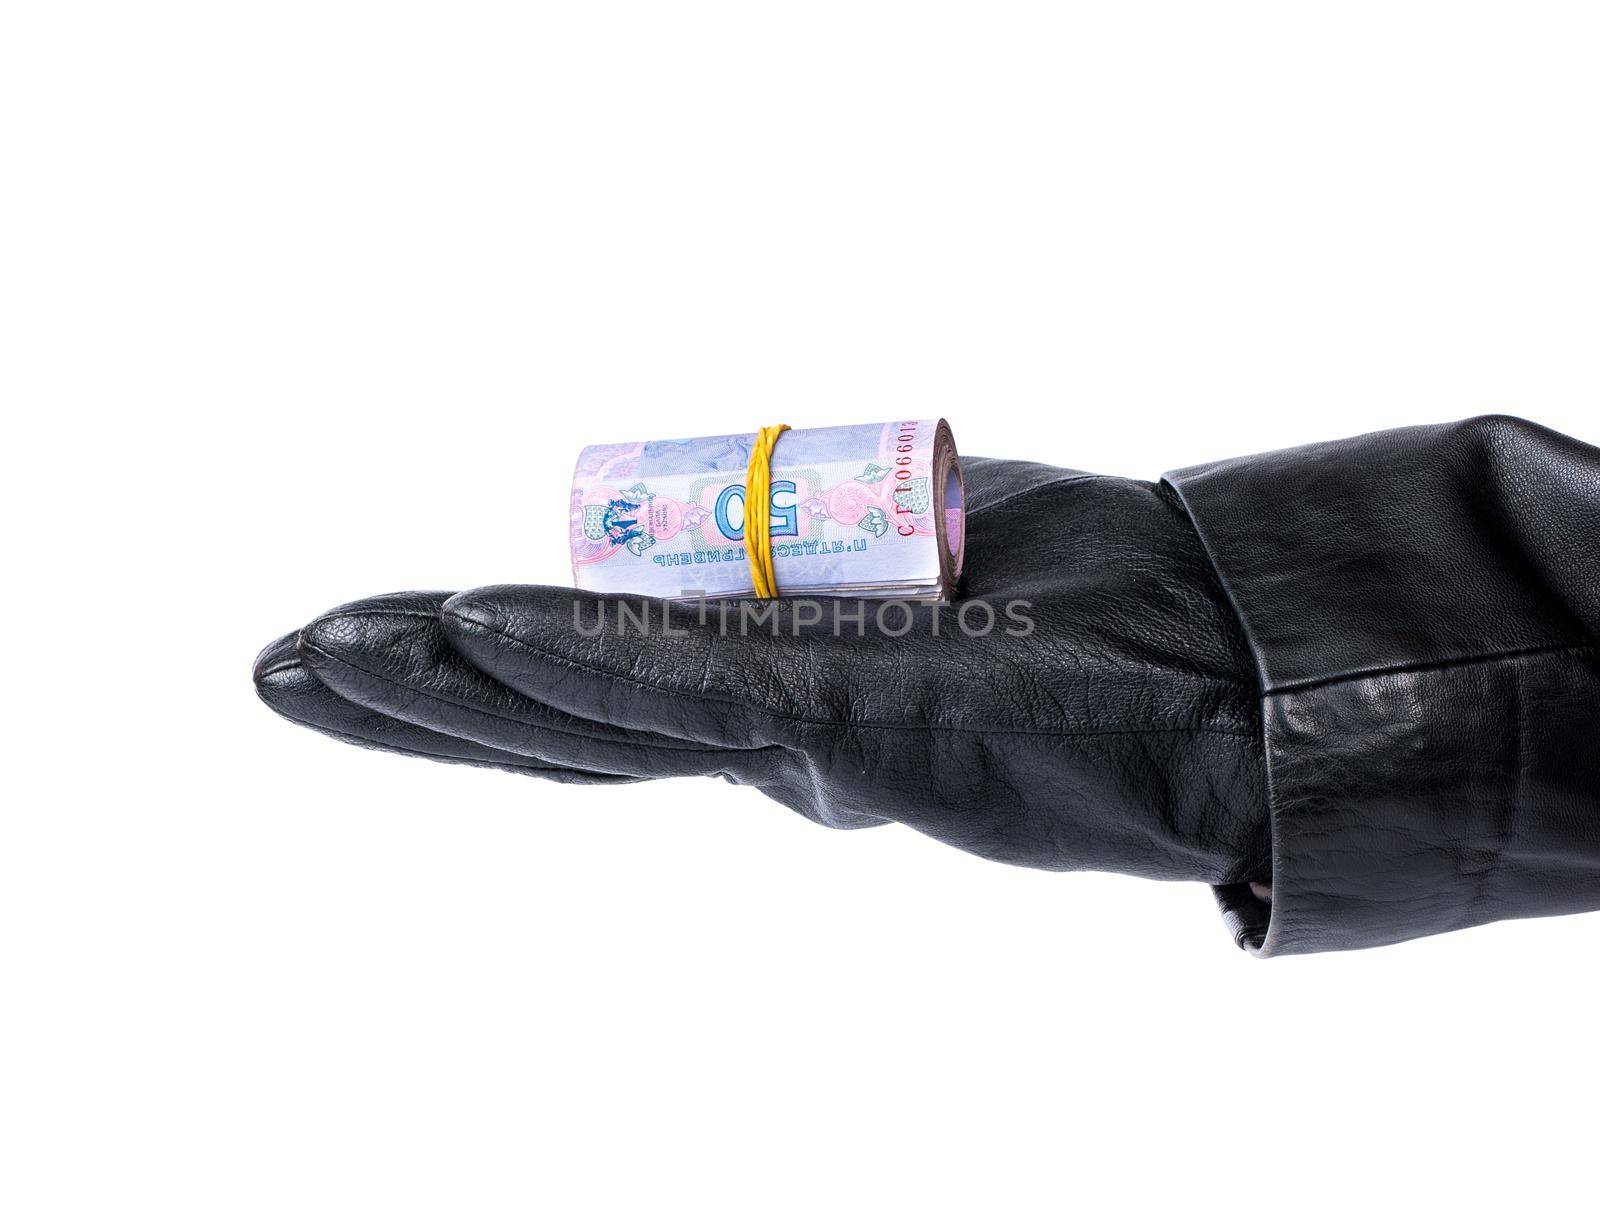 Thief in her hand holding a bunch of stolen Ukrainian money on a white background